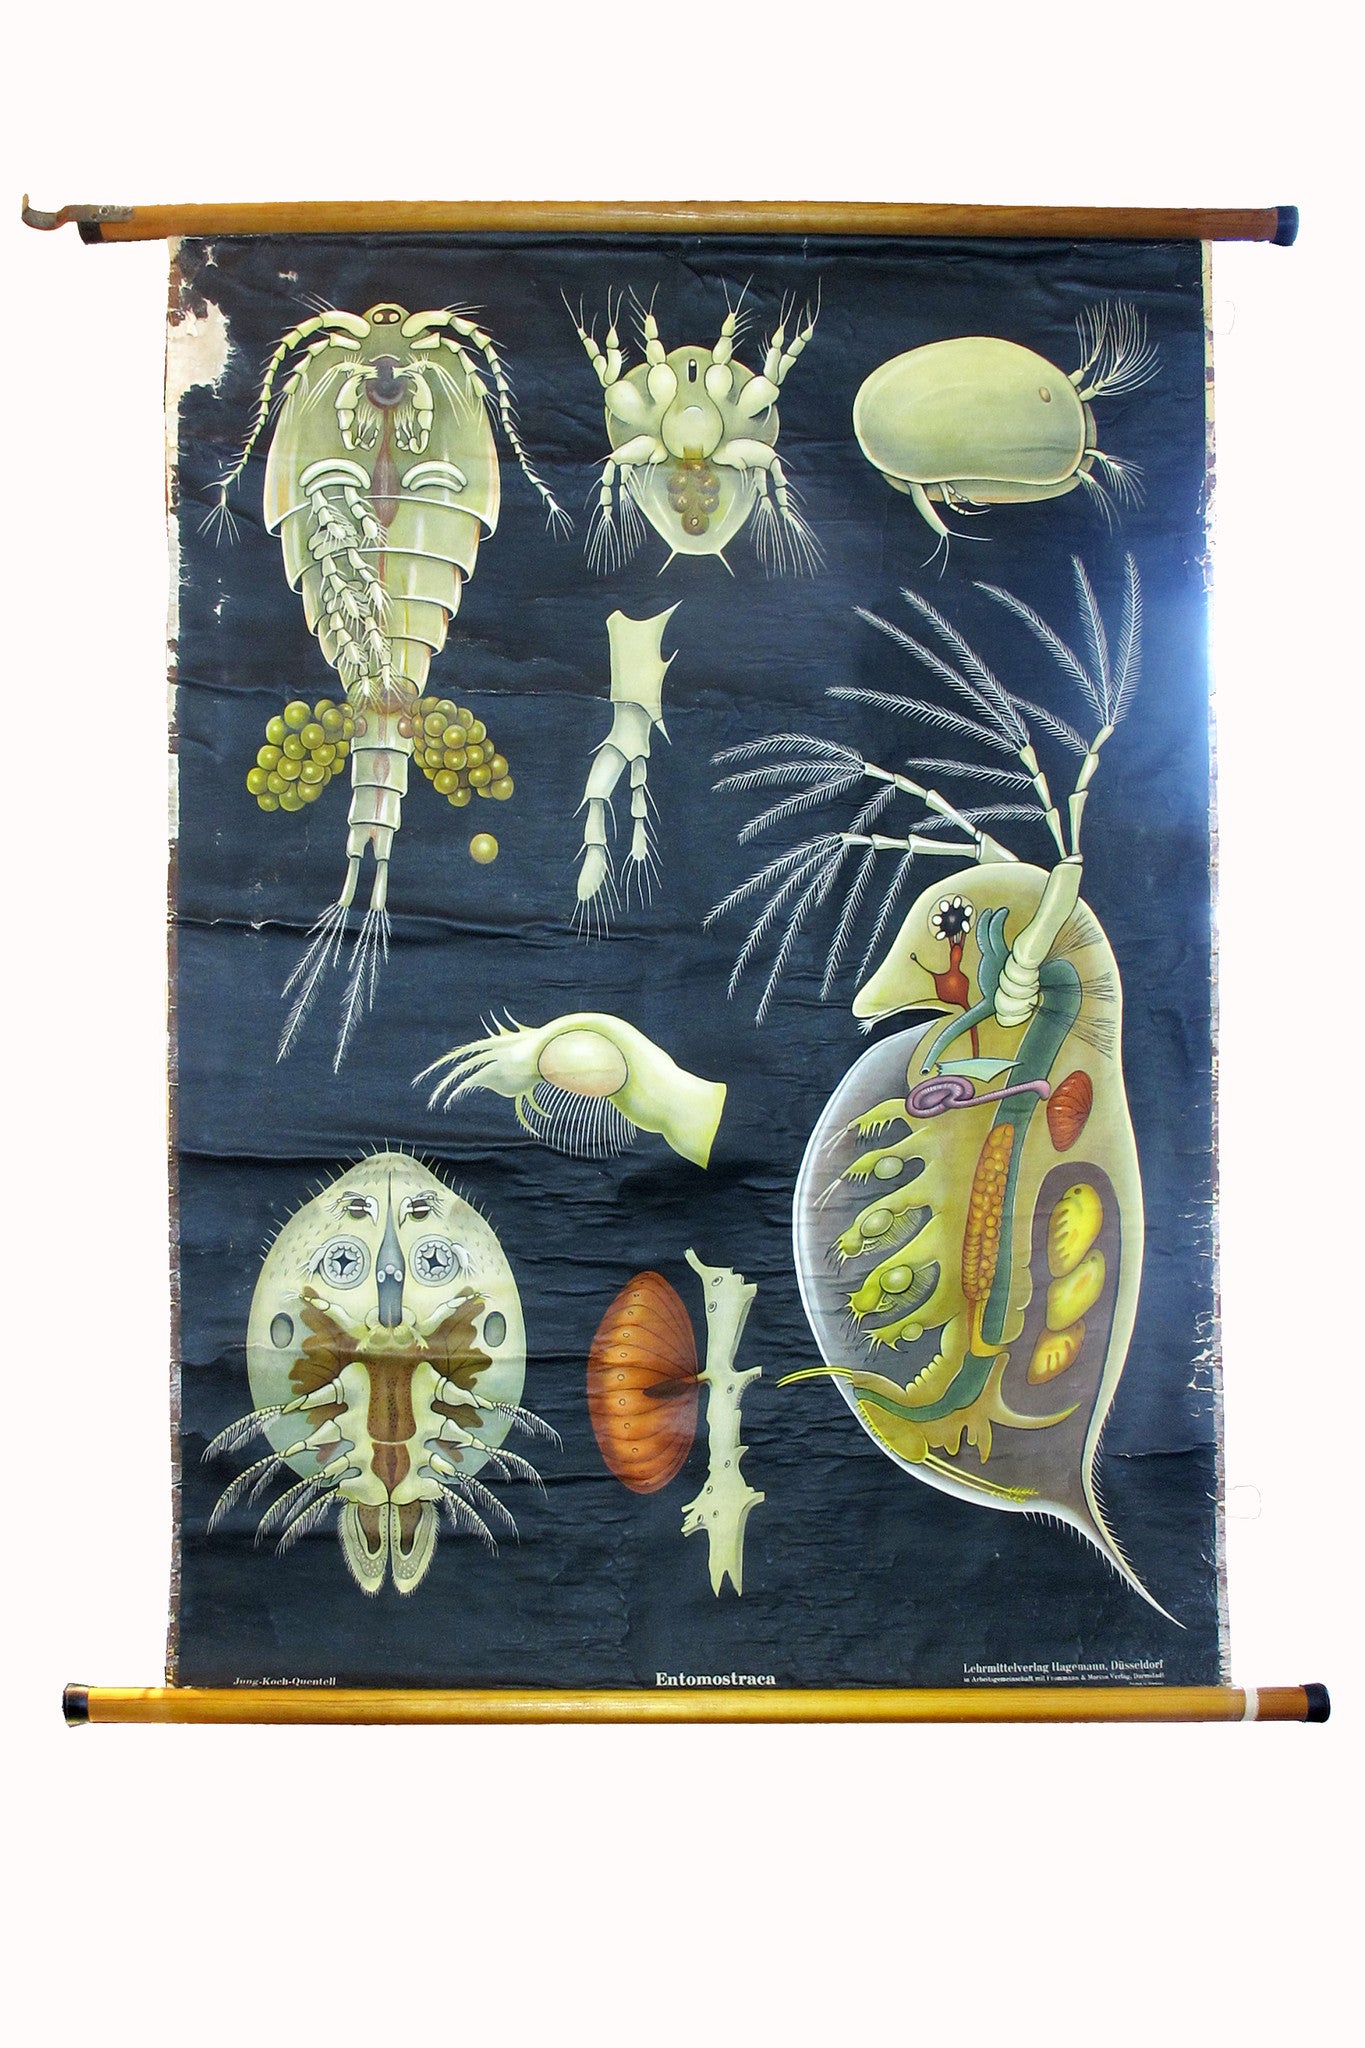 X Large linen backed wall chart of daphnia, early 20th century.